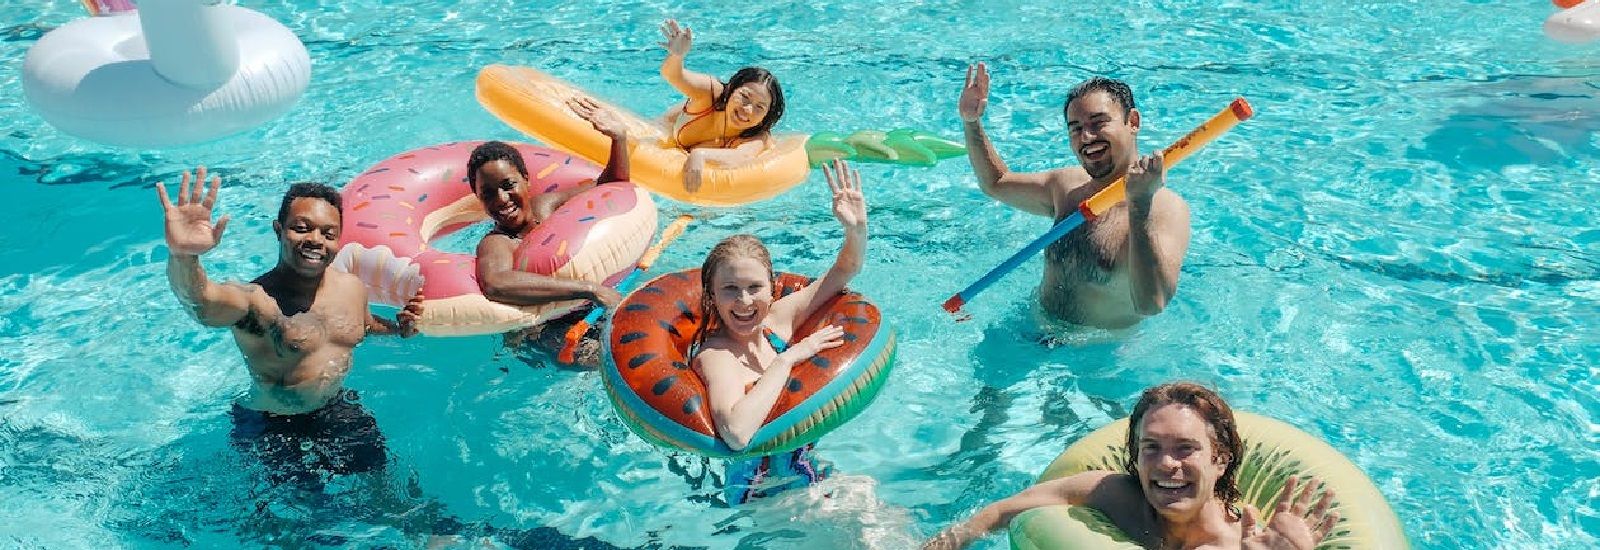 Pool Party 2 banner image